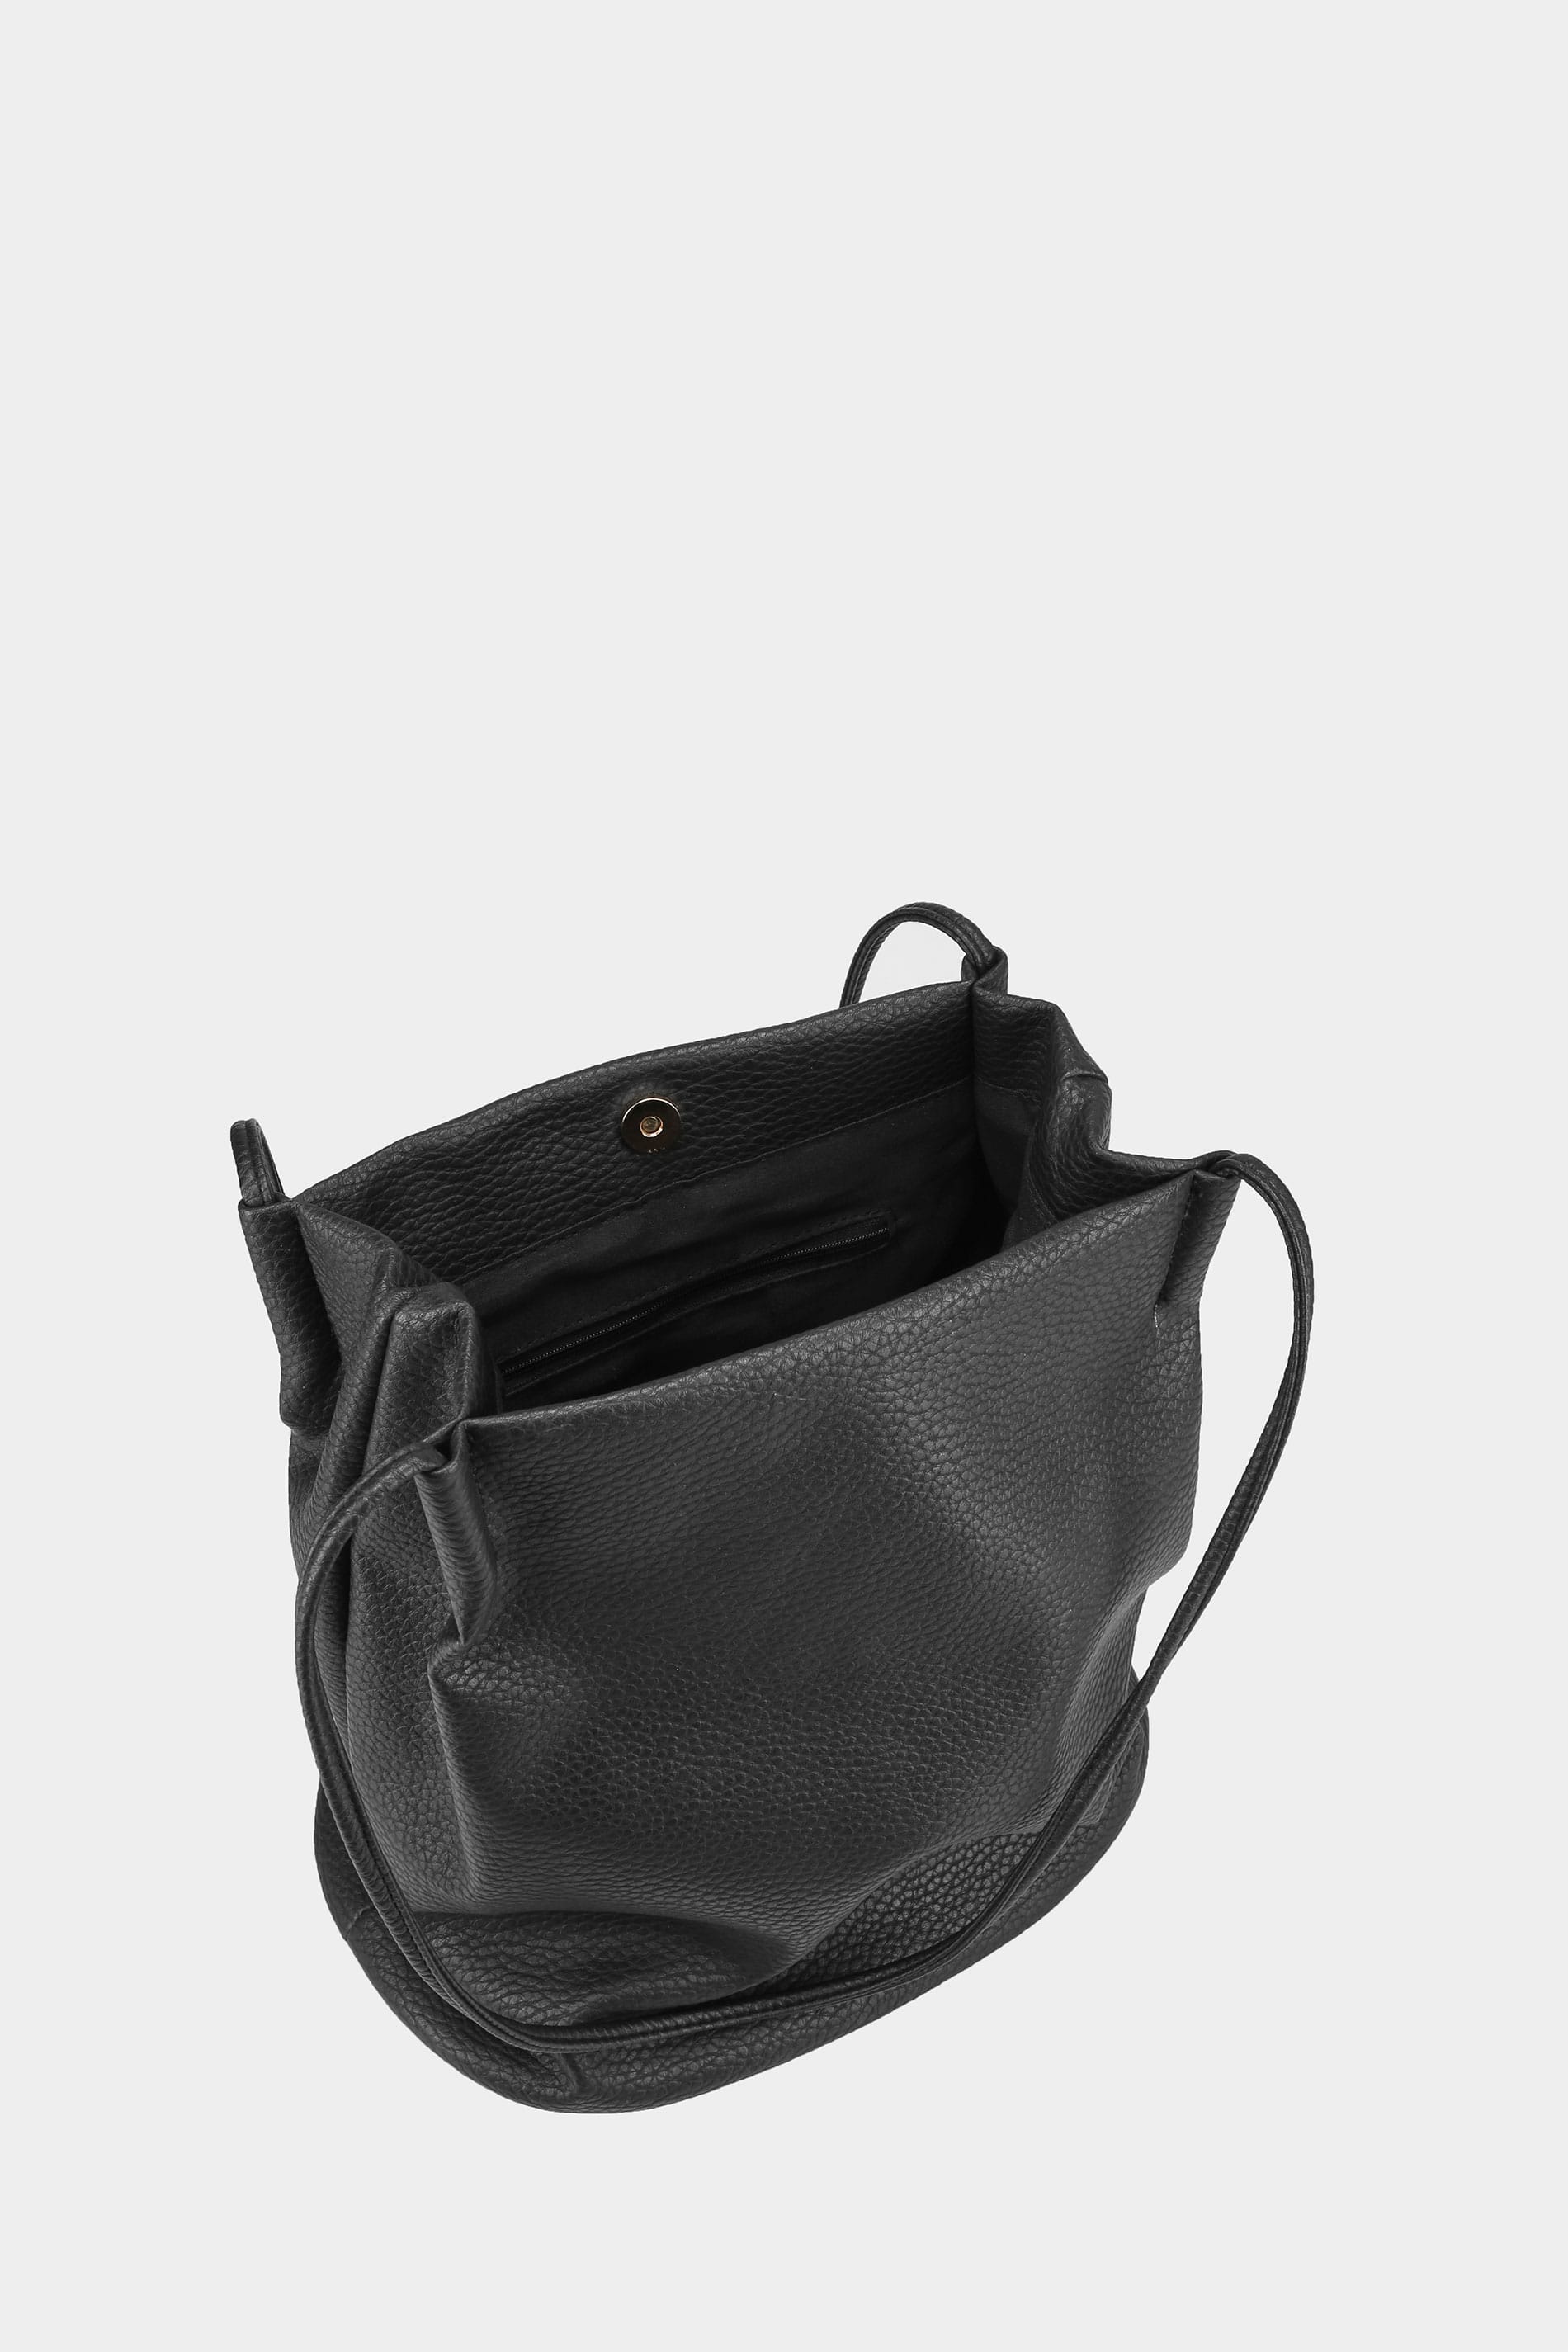 Black PU Leather Look Bucket Bag With Double Handles